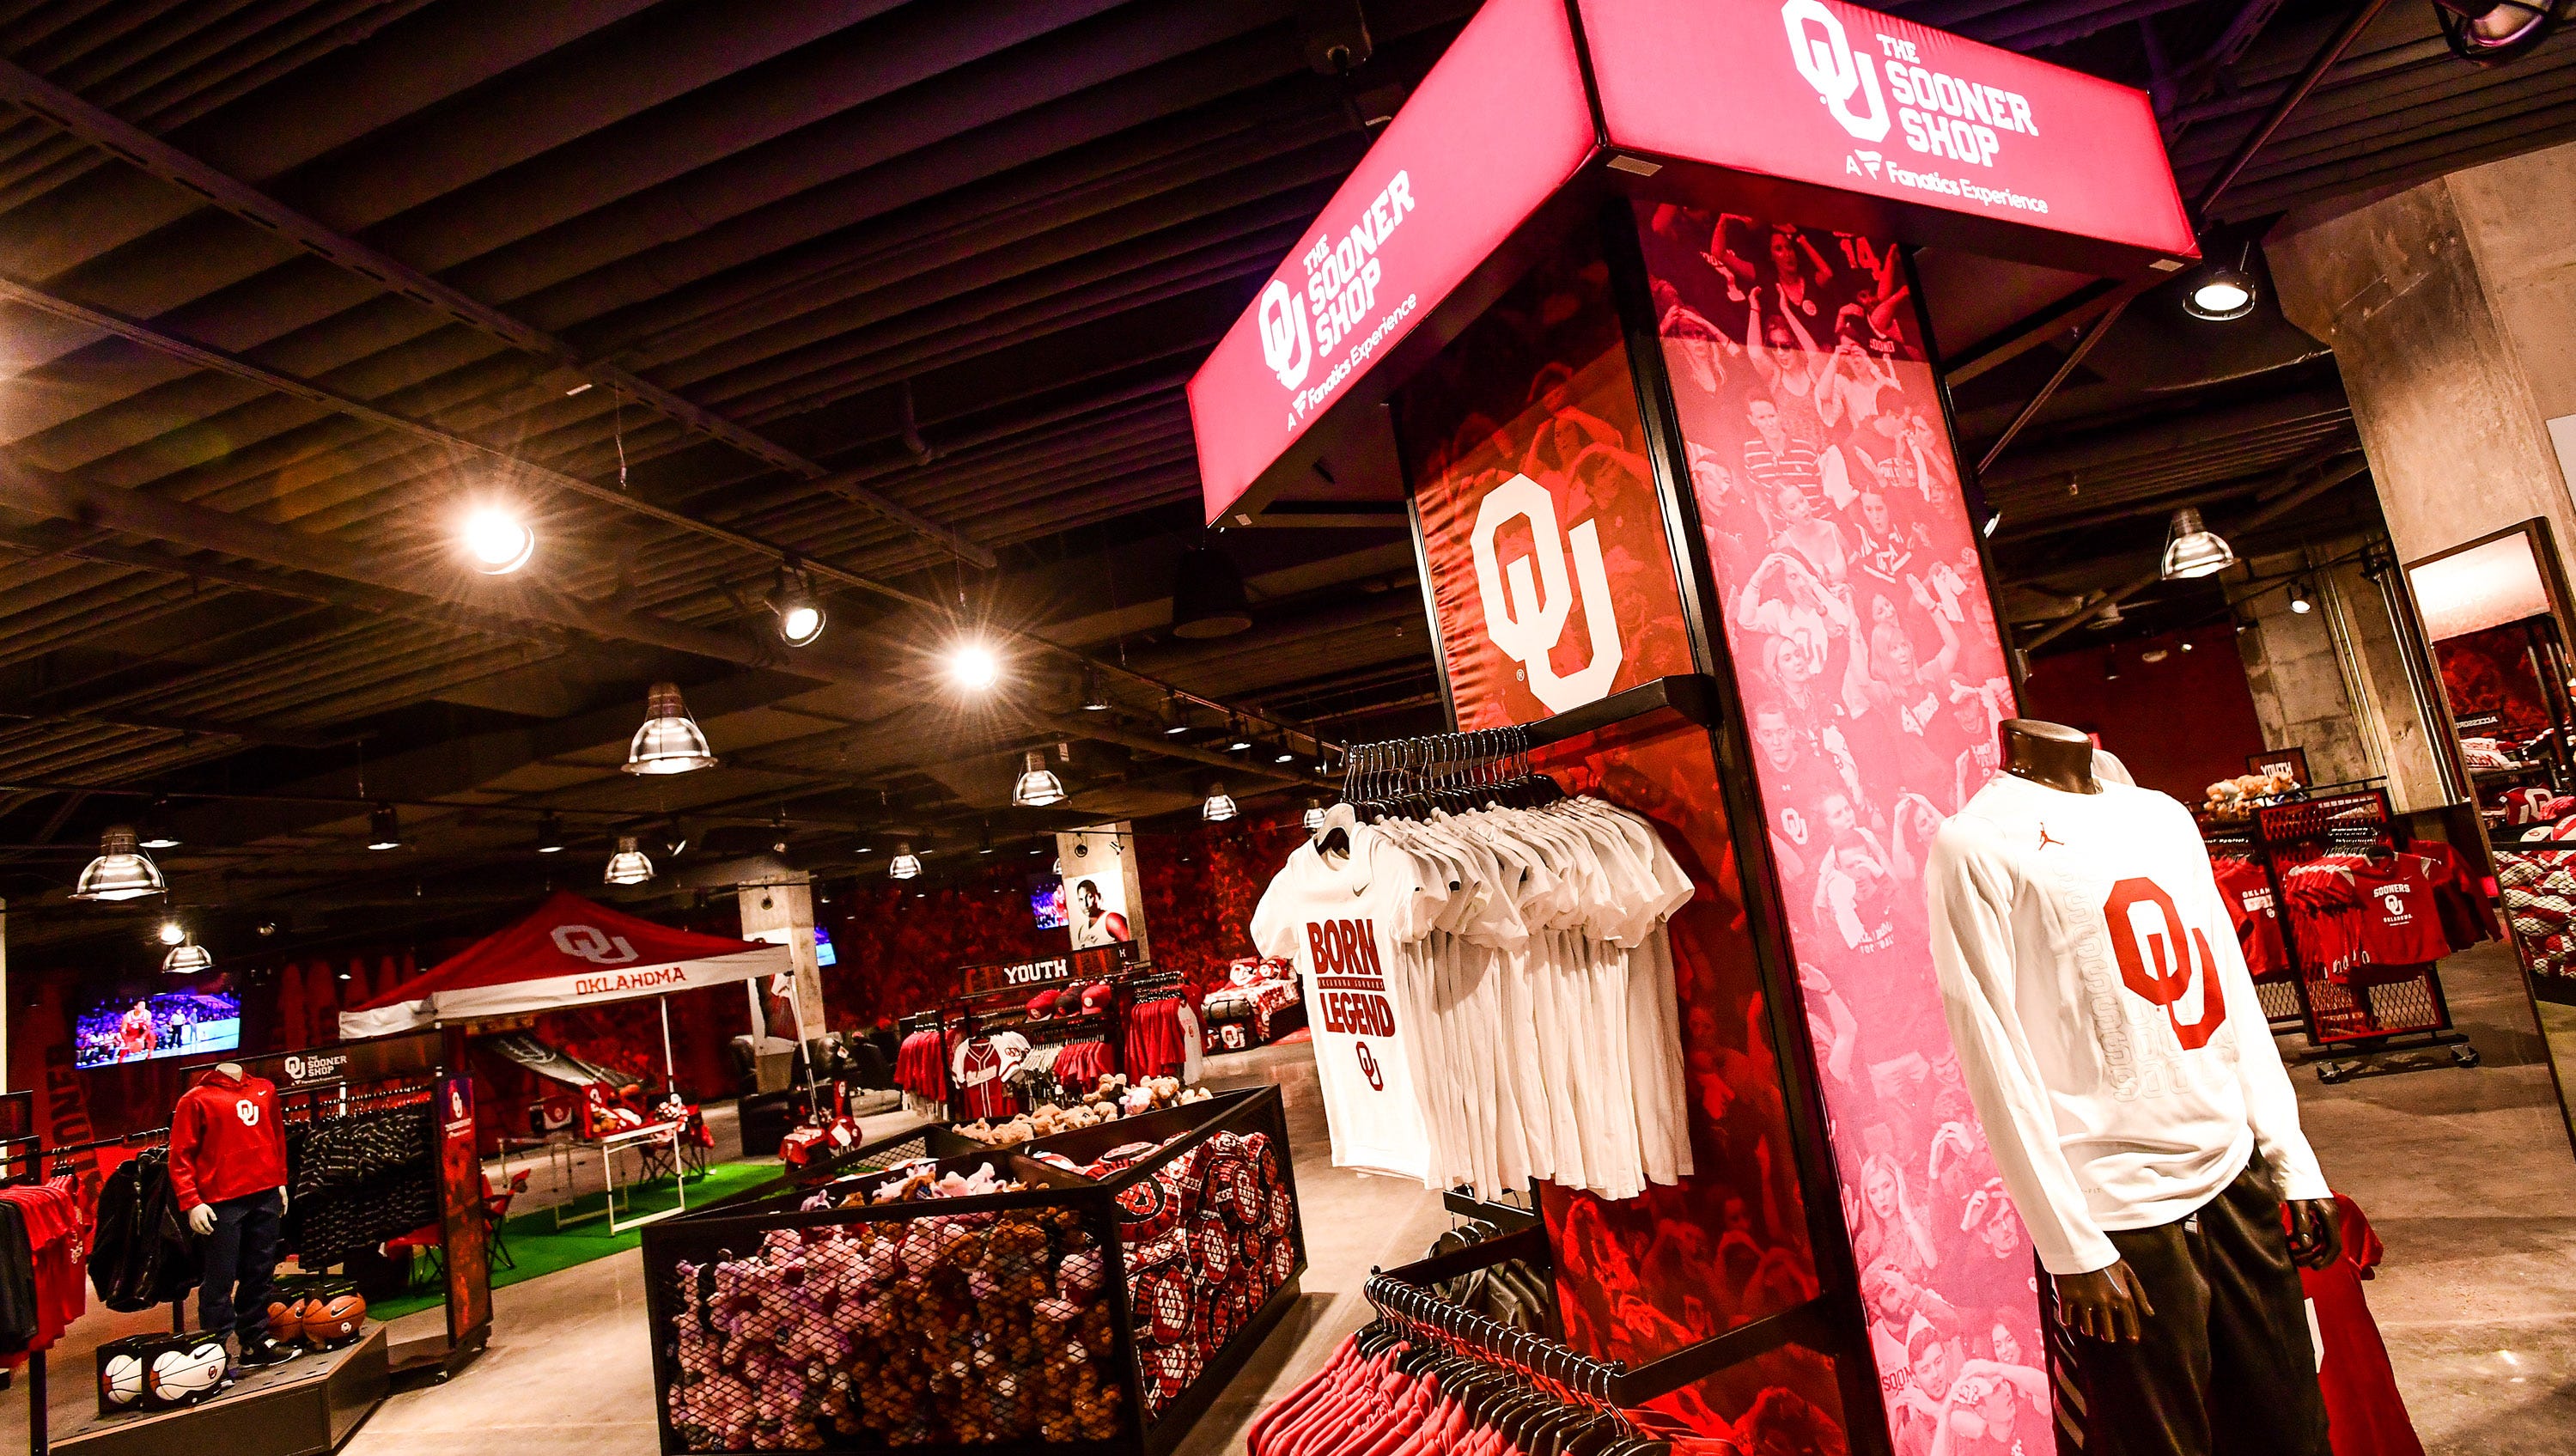 New stadium store, The Sooner Shop, to open Friday